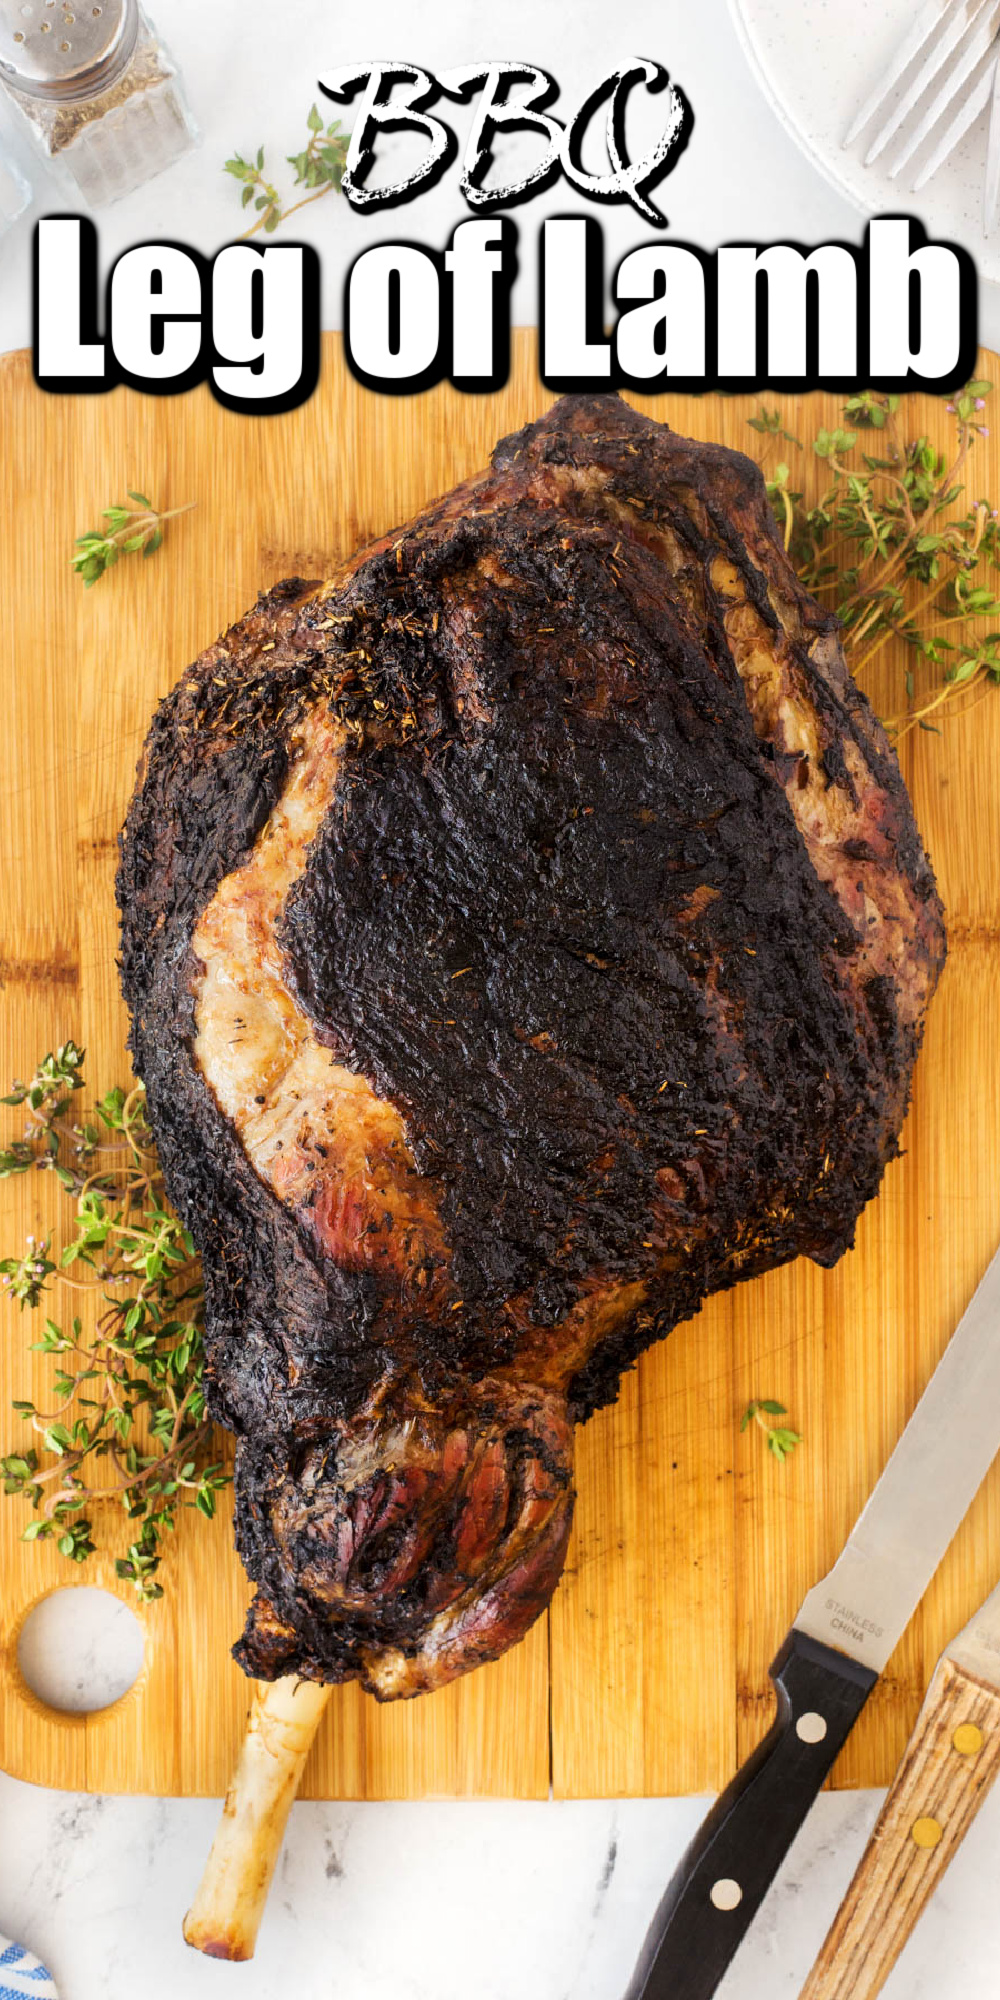 This amazing BBQ leg of lamb is perfect for a special elegant dinner with family and friends, but you will want to make it for dinner any night of the week!